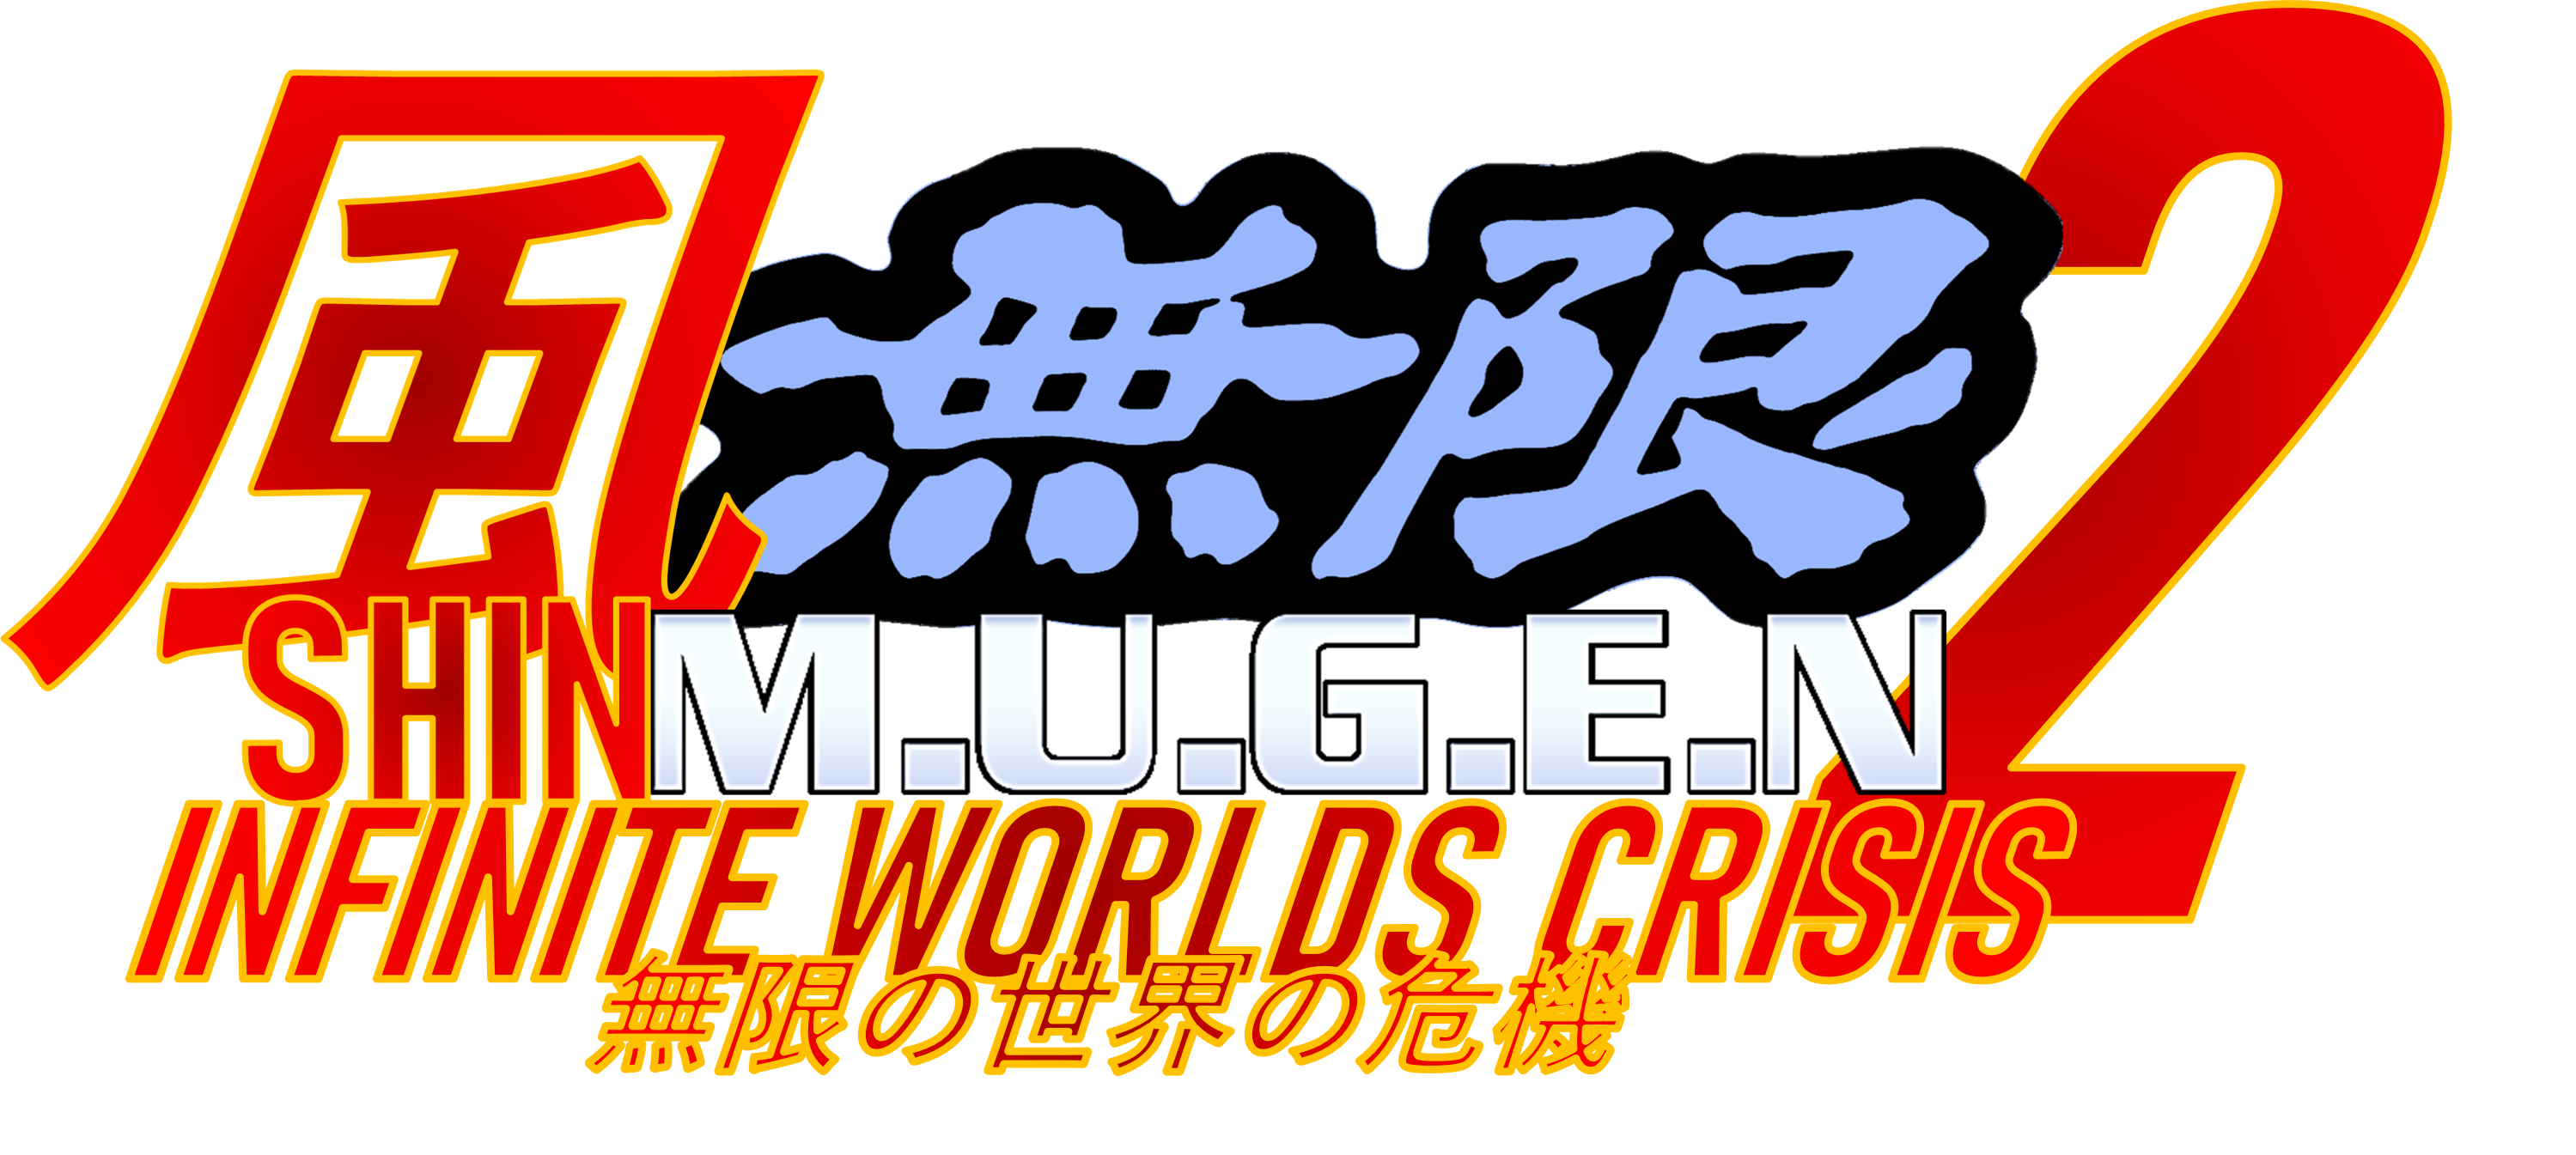 Who is MUGEN for? - General Discussion - Giant Bomb